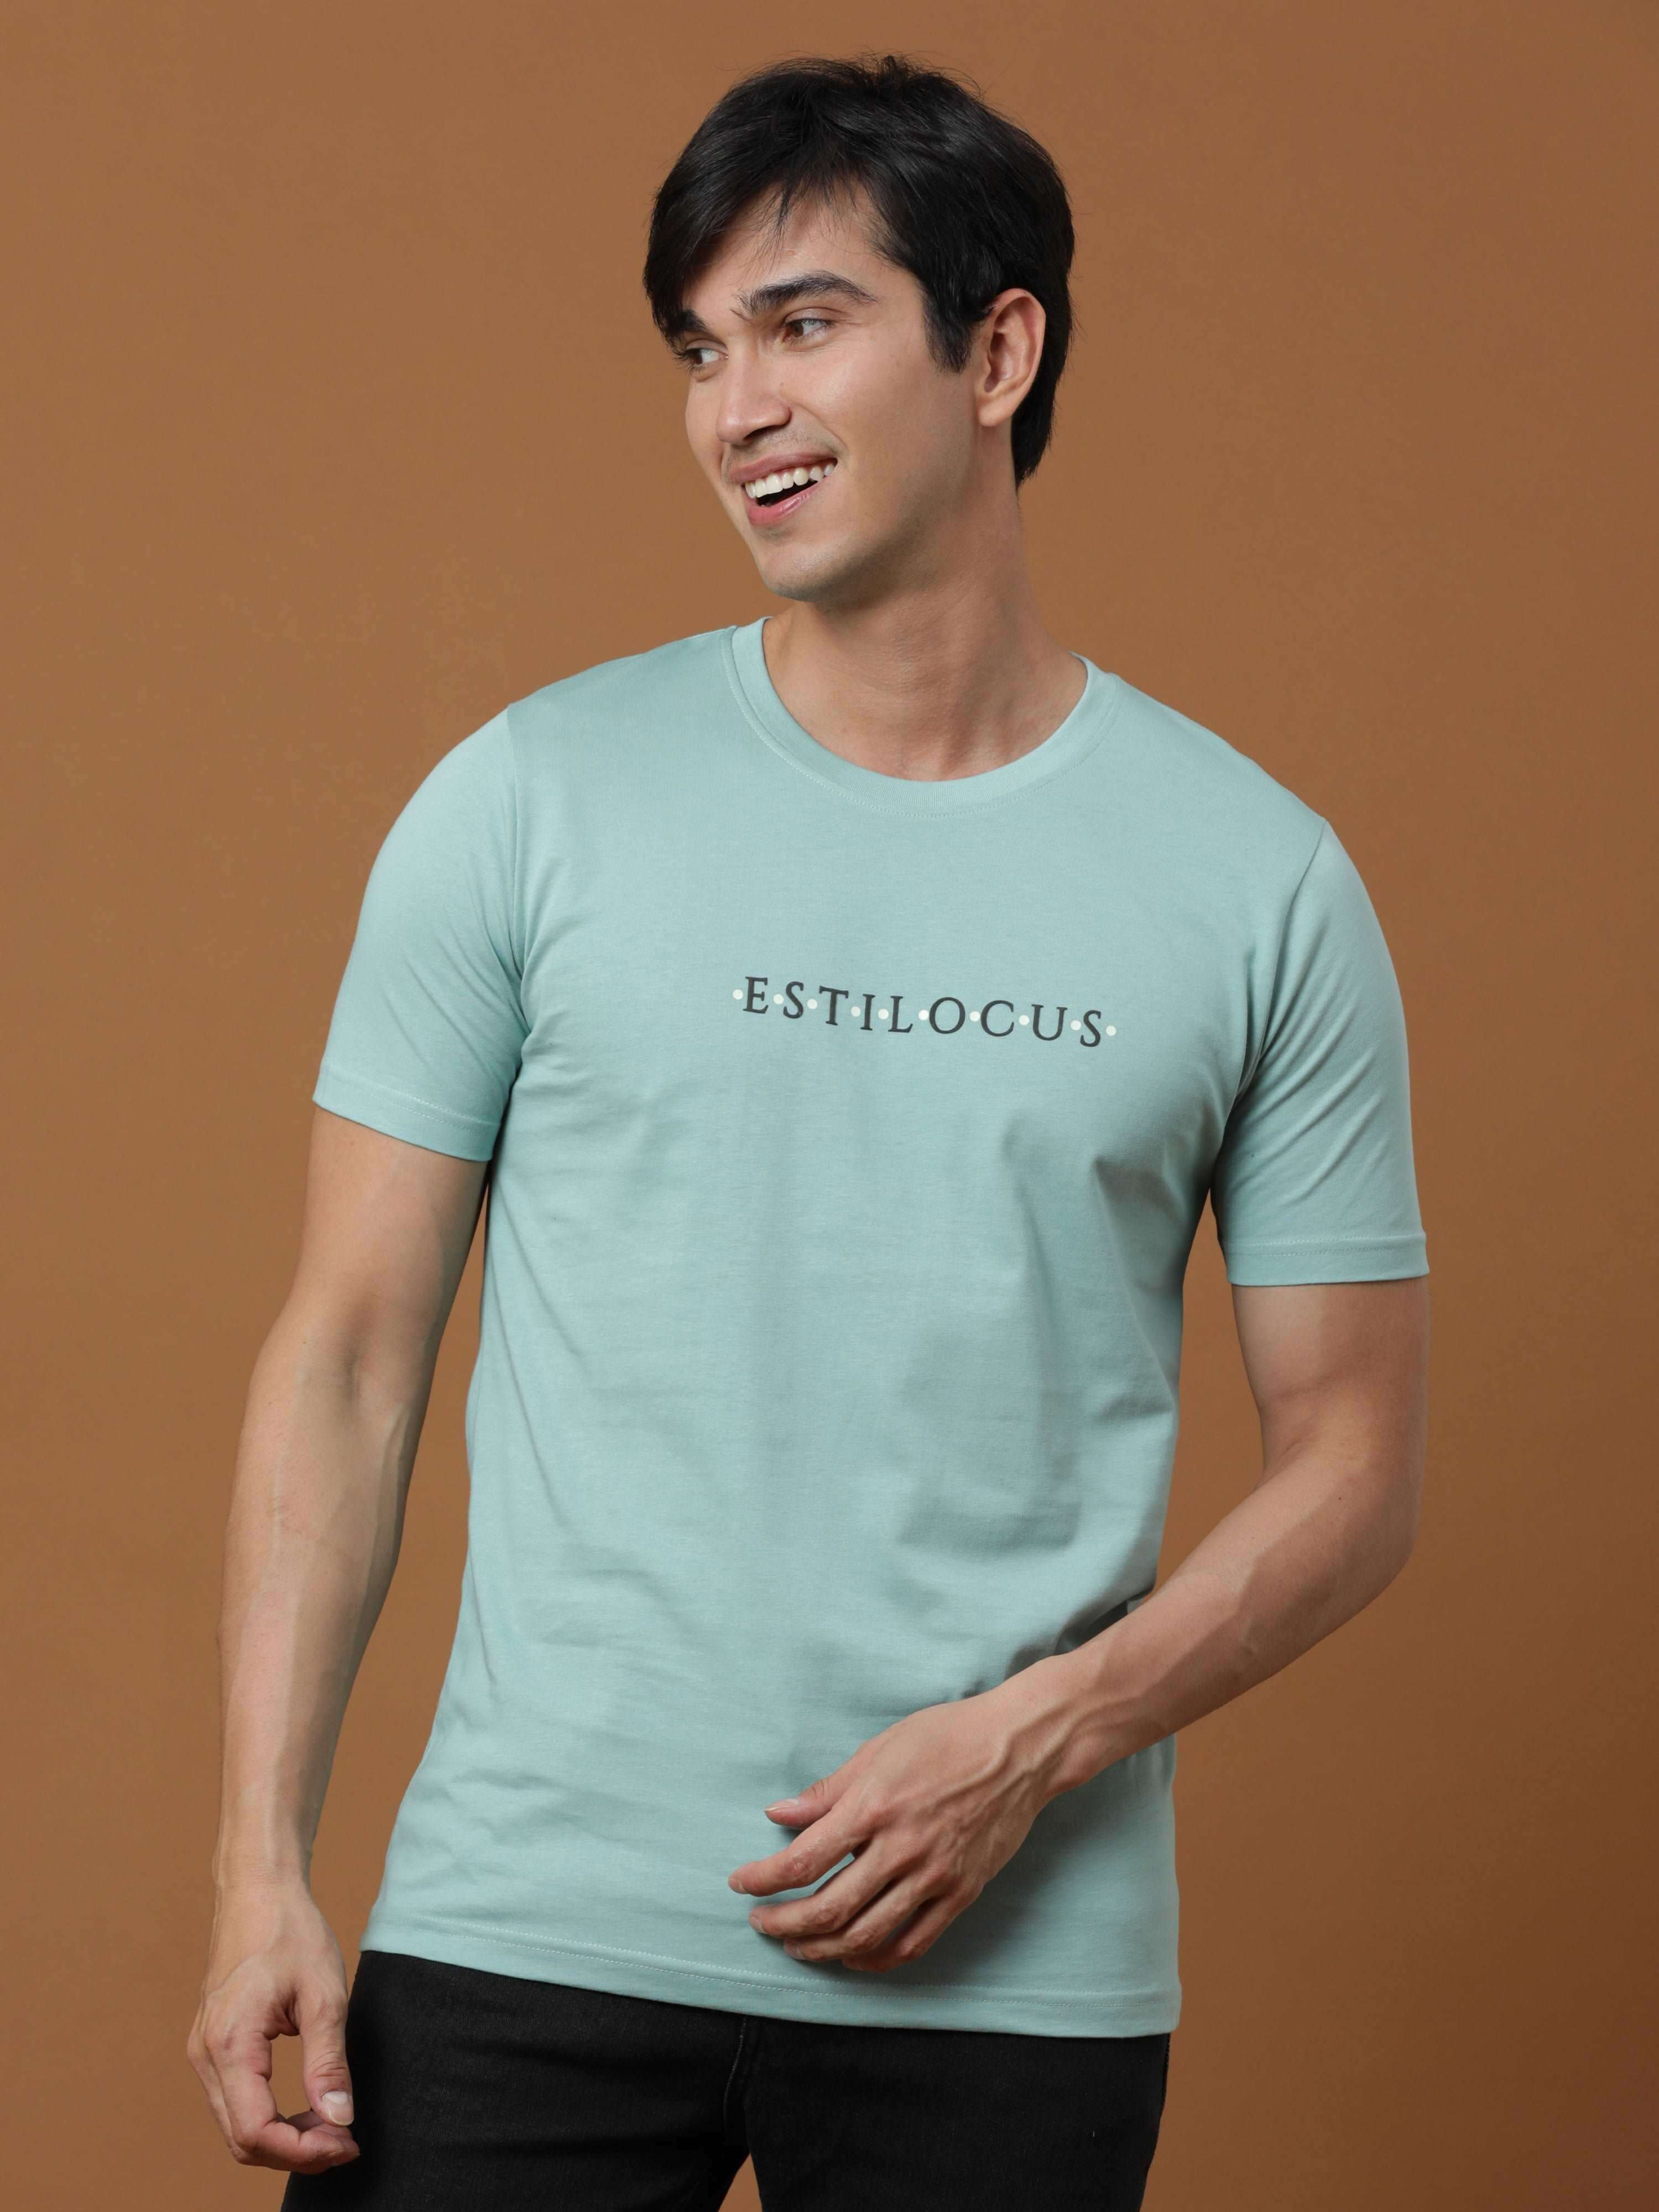 Aqua Luminescent Printed T Shirt shop online at Estilocus. 100% Cotton Designed and printed on knitted fabric. The fabric is stretchy and lightweight, with a soft skin feel and no wrinkles. Crew neck collar which is smooth on the neck and keeps you comfor